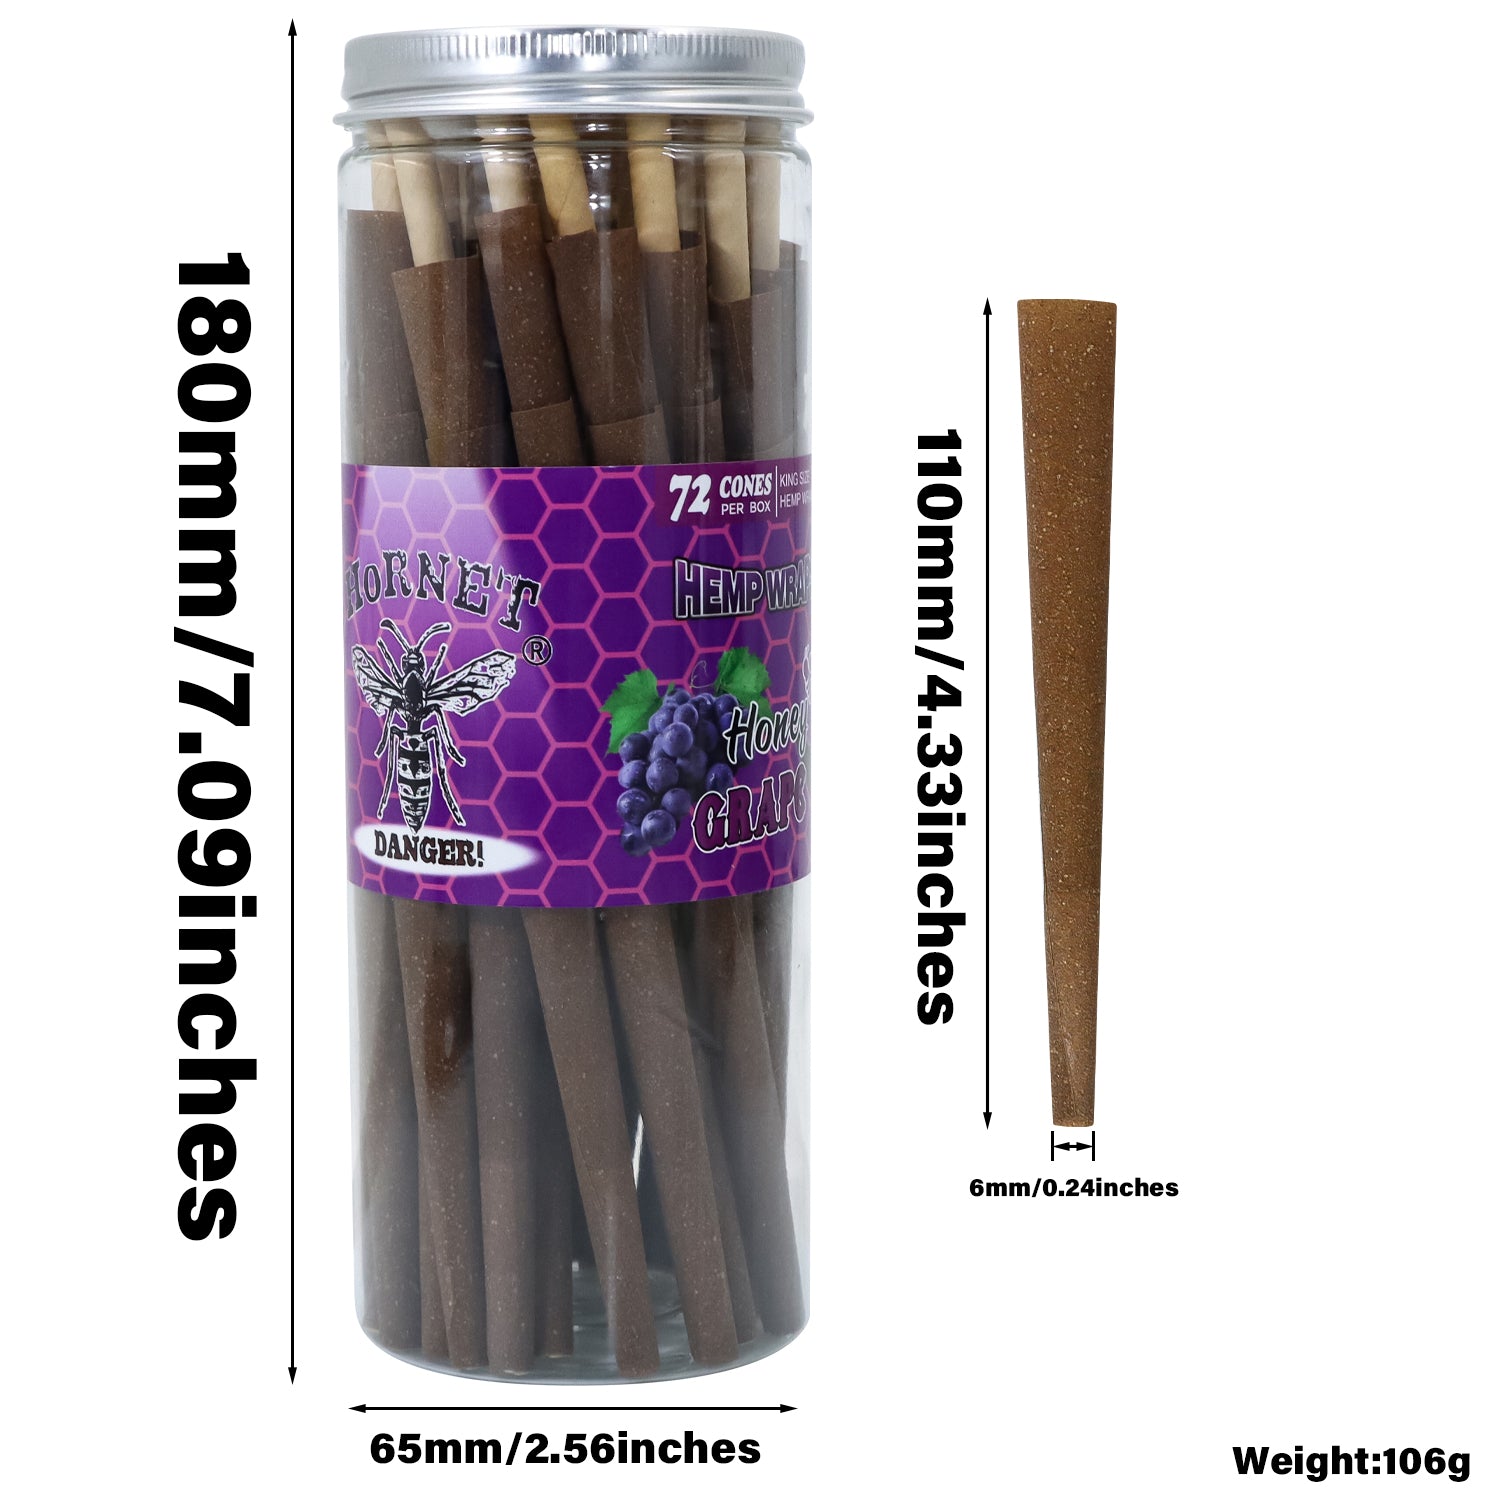 HORNET Grape Flavored Pre Rolled Cones, King Size Brown Pre Rolled Rolling Paper with tips, Slow Burning Rolling Cones & load, 72 PCS / Jar